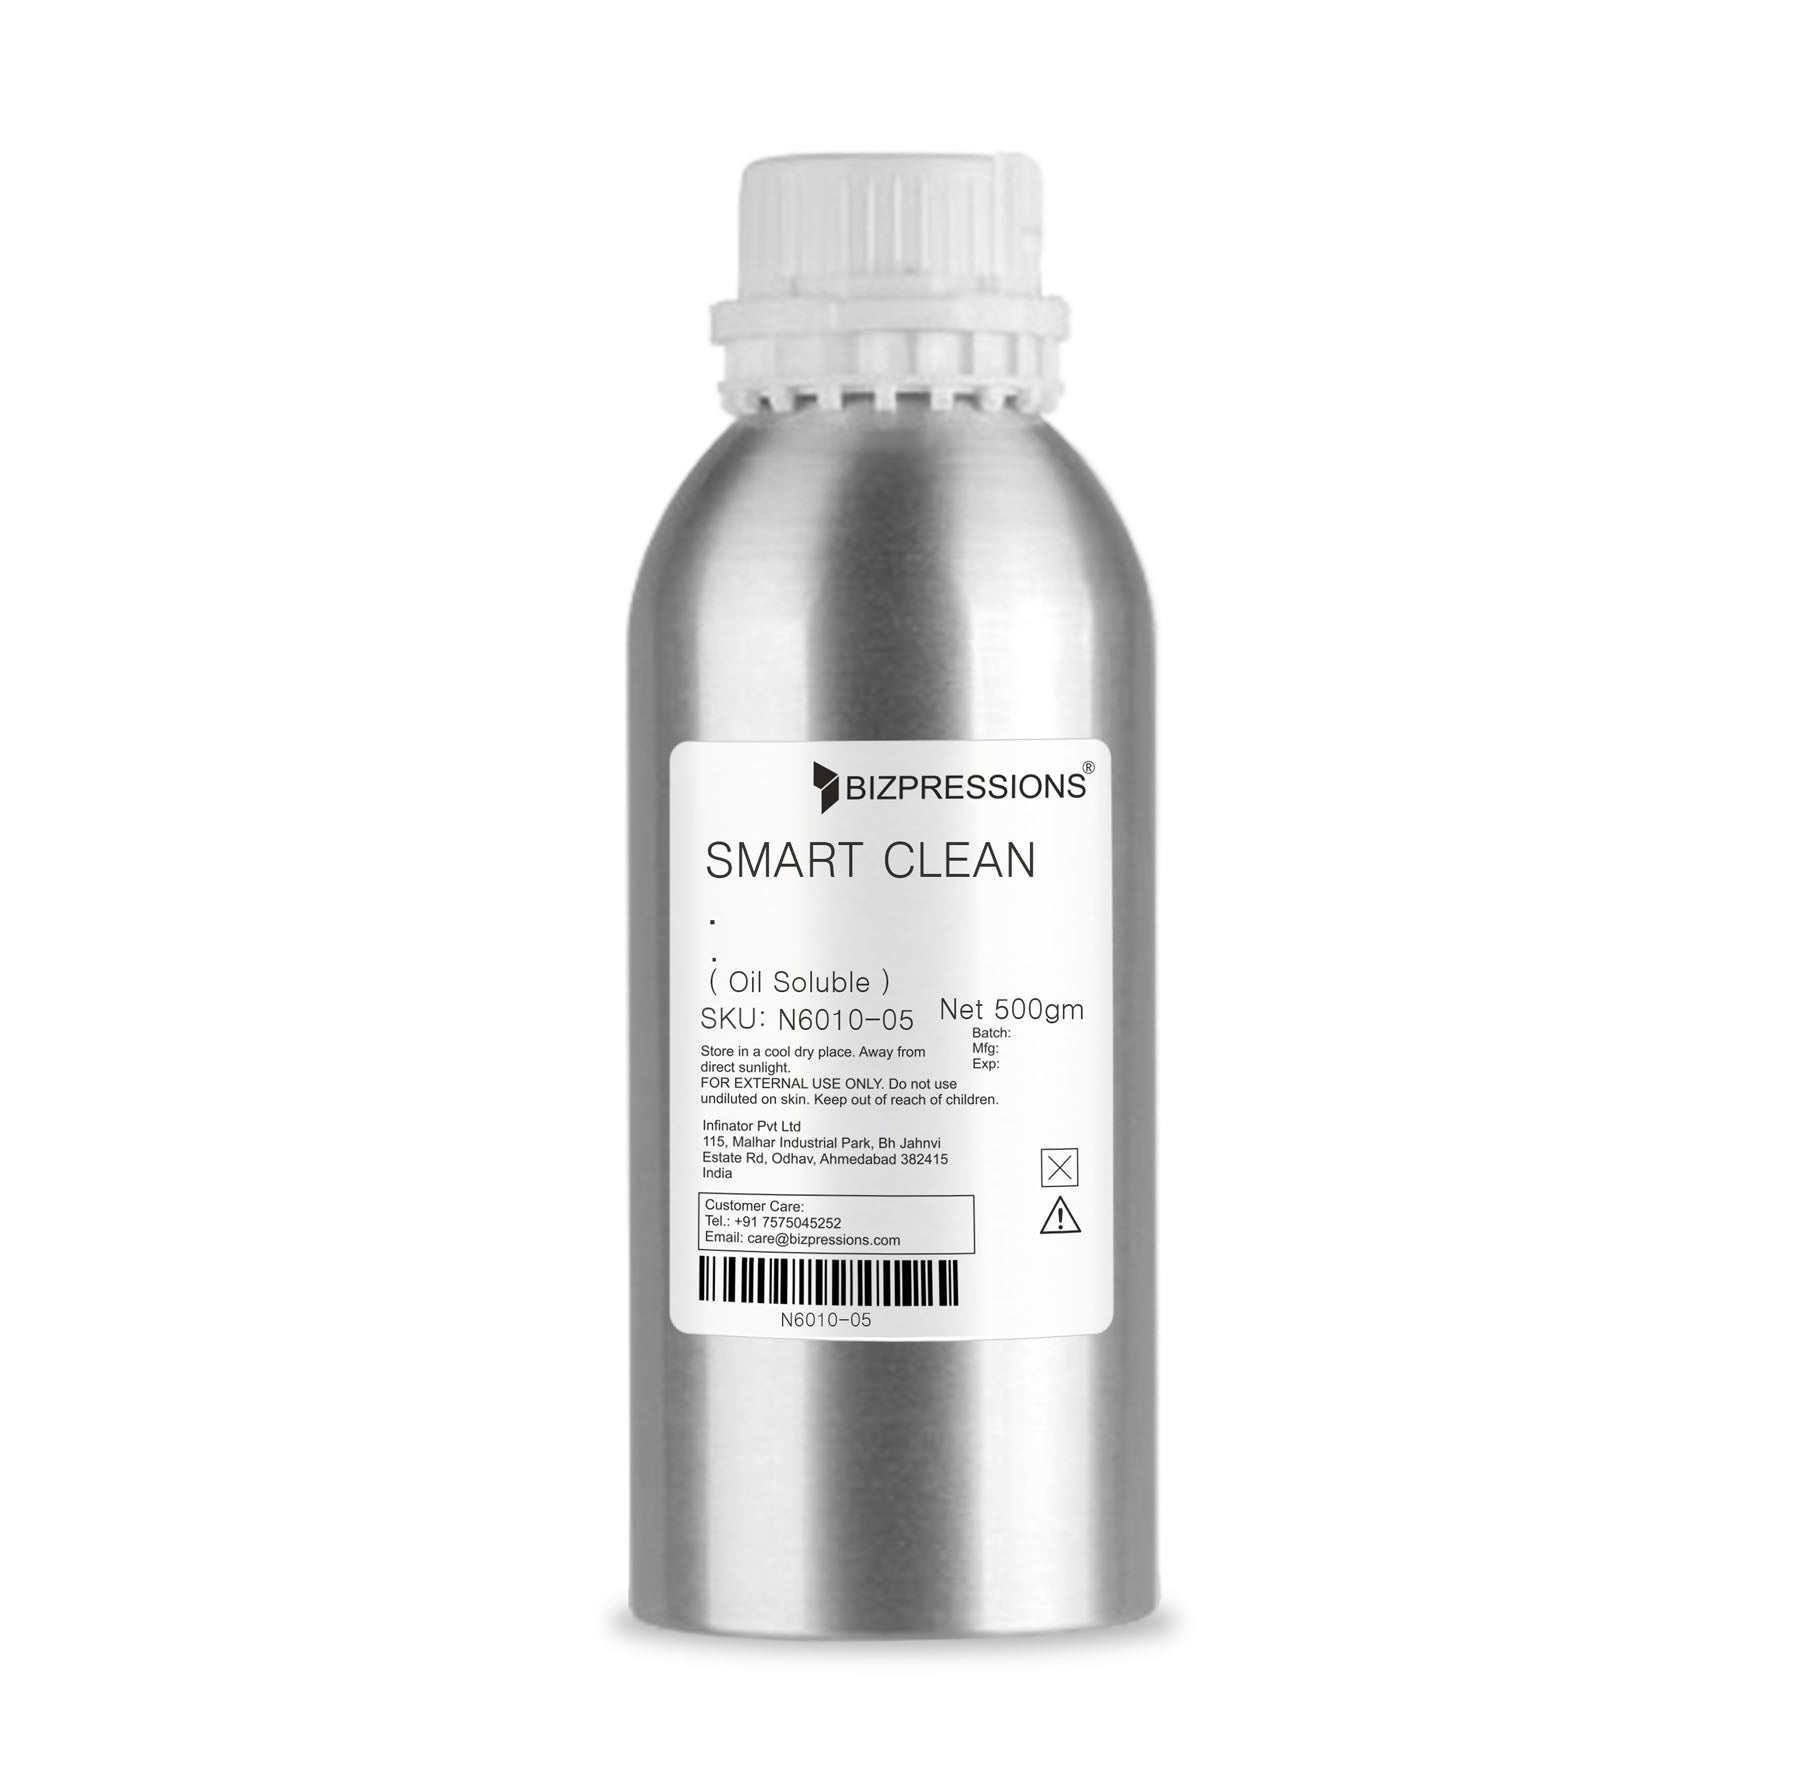 SMART CLEAN - Fragrance ( Oil Soluble ) - 500 gm